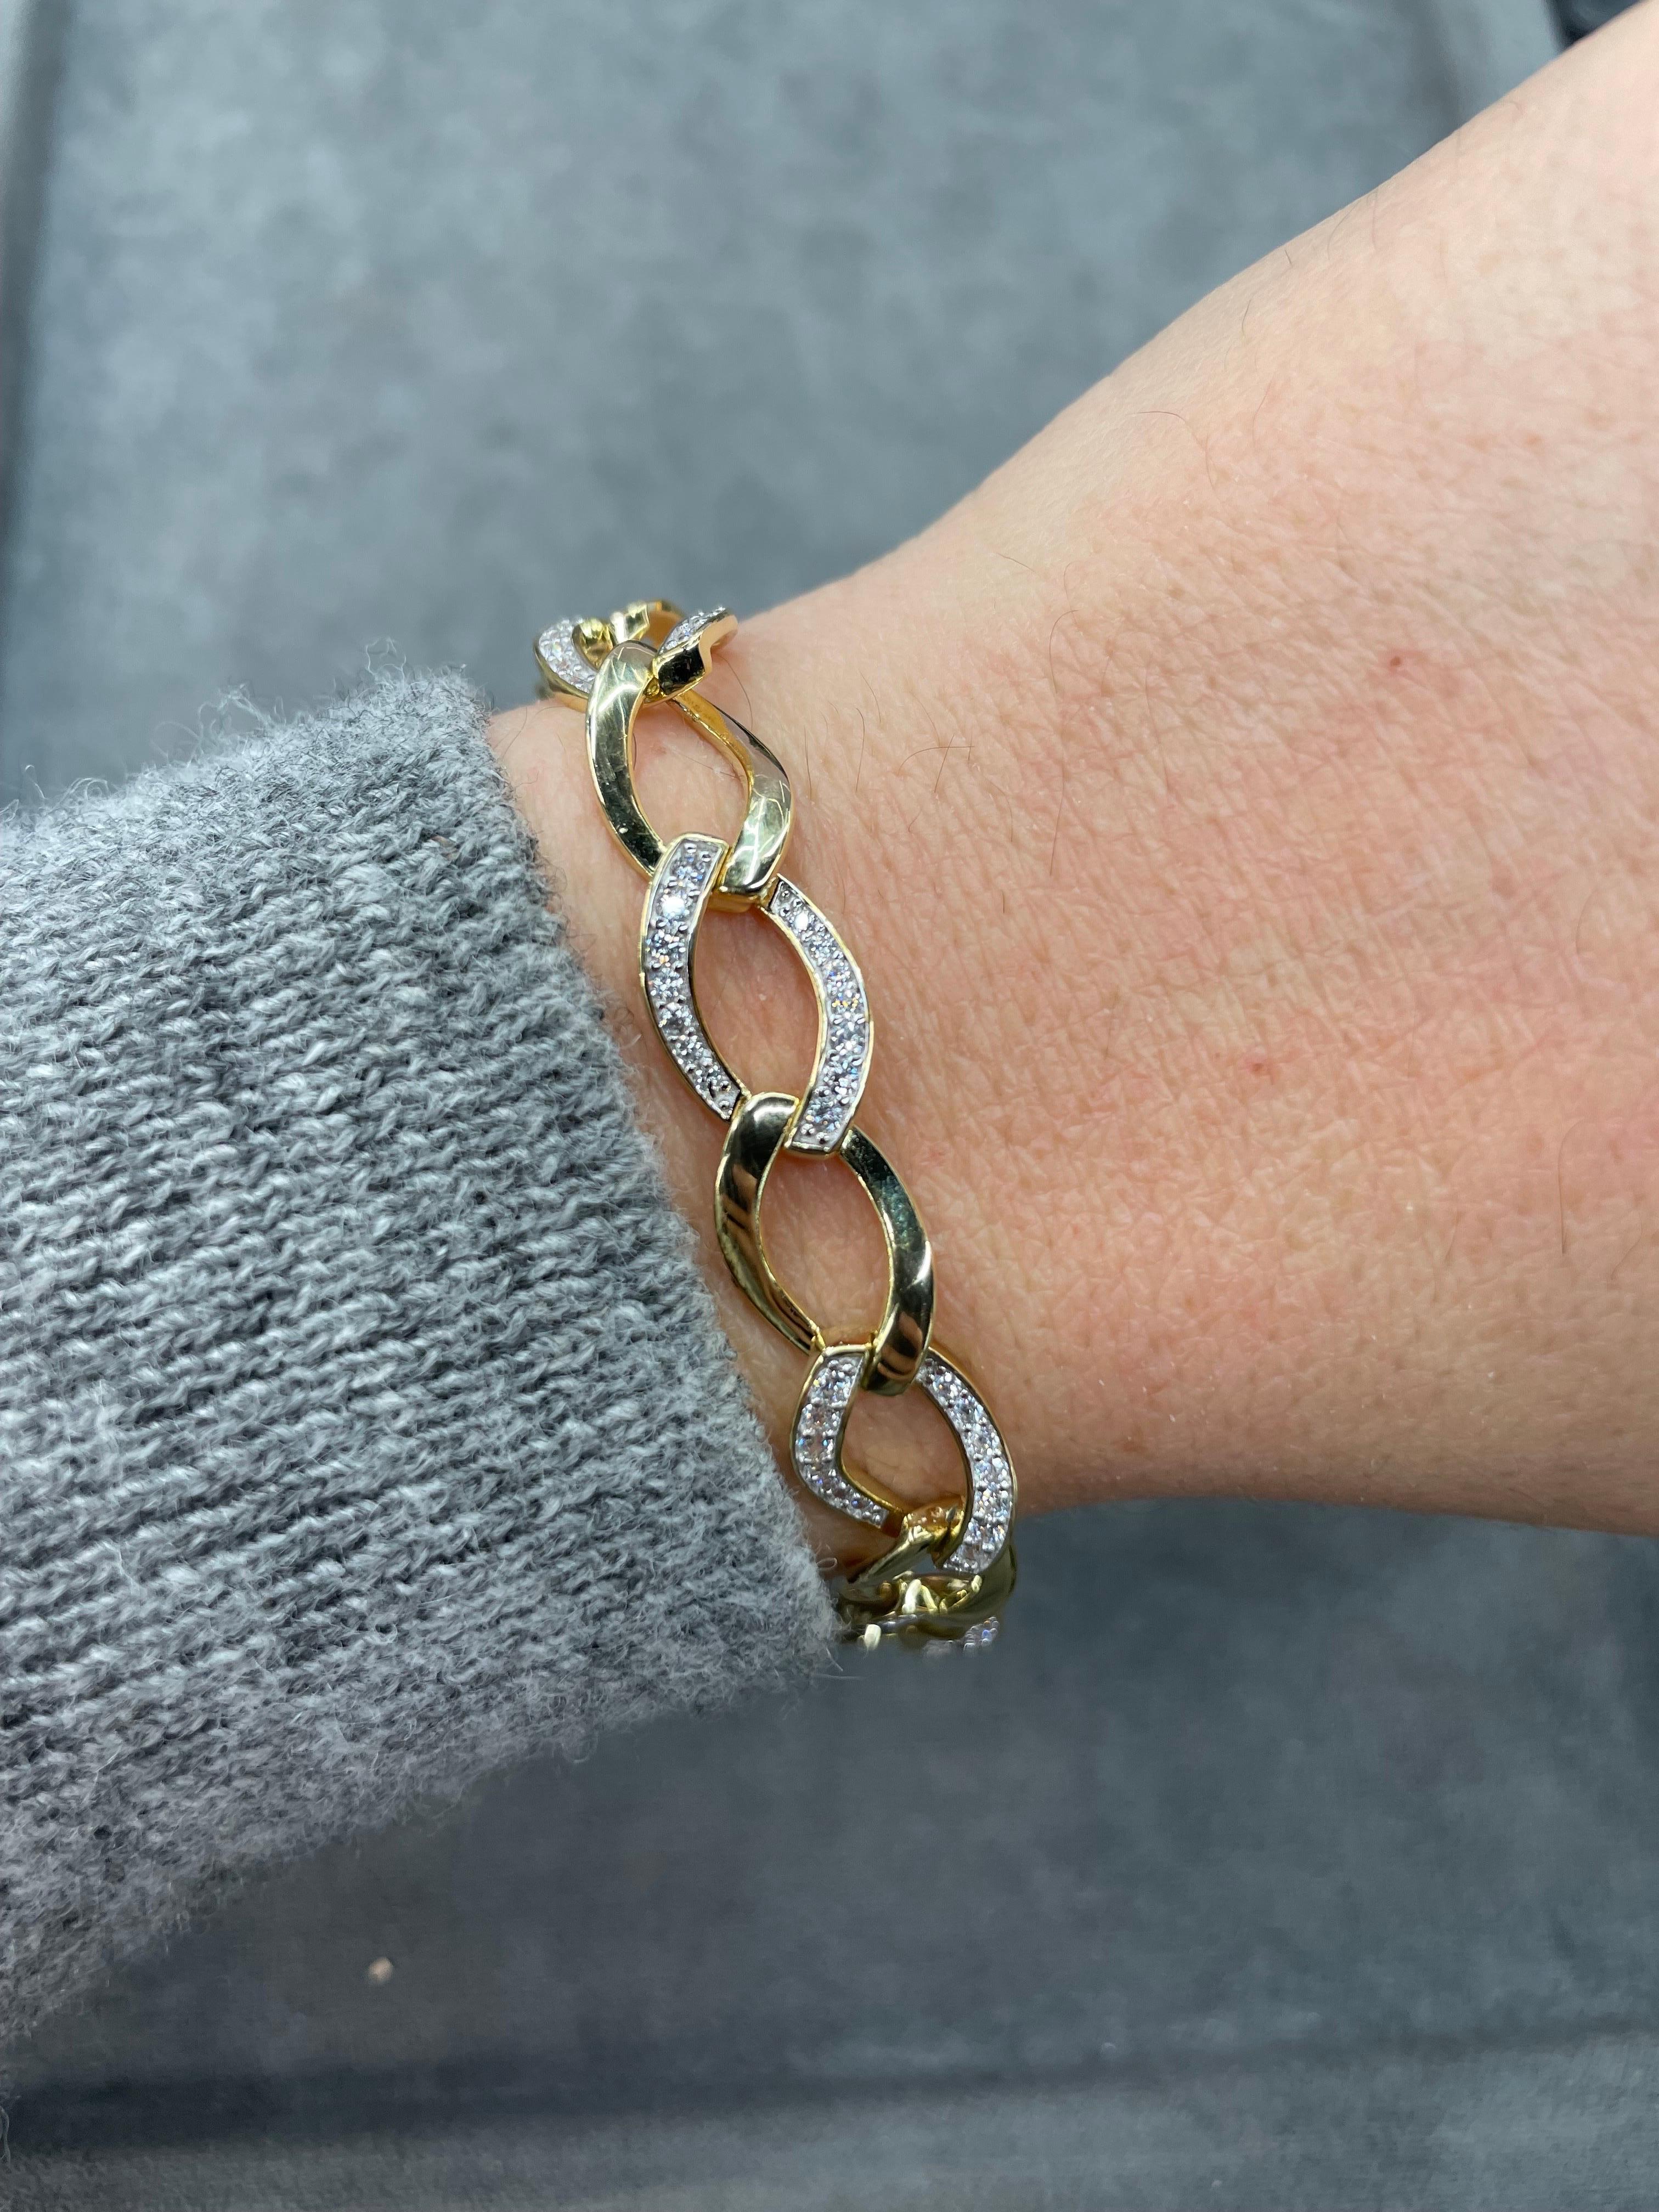 Sterling silver bracelet featuring marquise shape links with alternating cubic zirconia and high polish links. 
Will not tarnish, high quality silver!